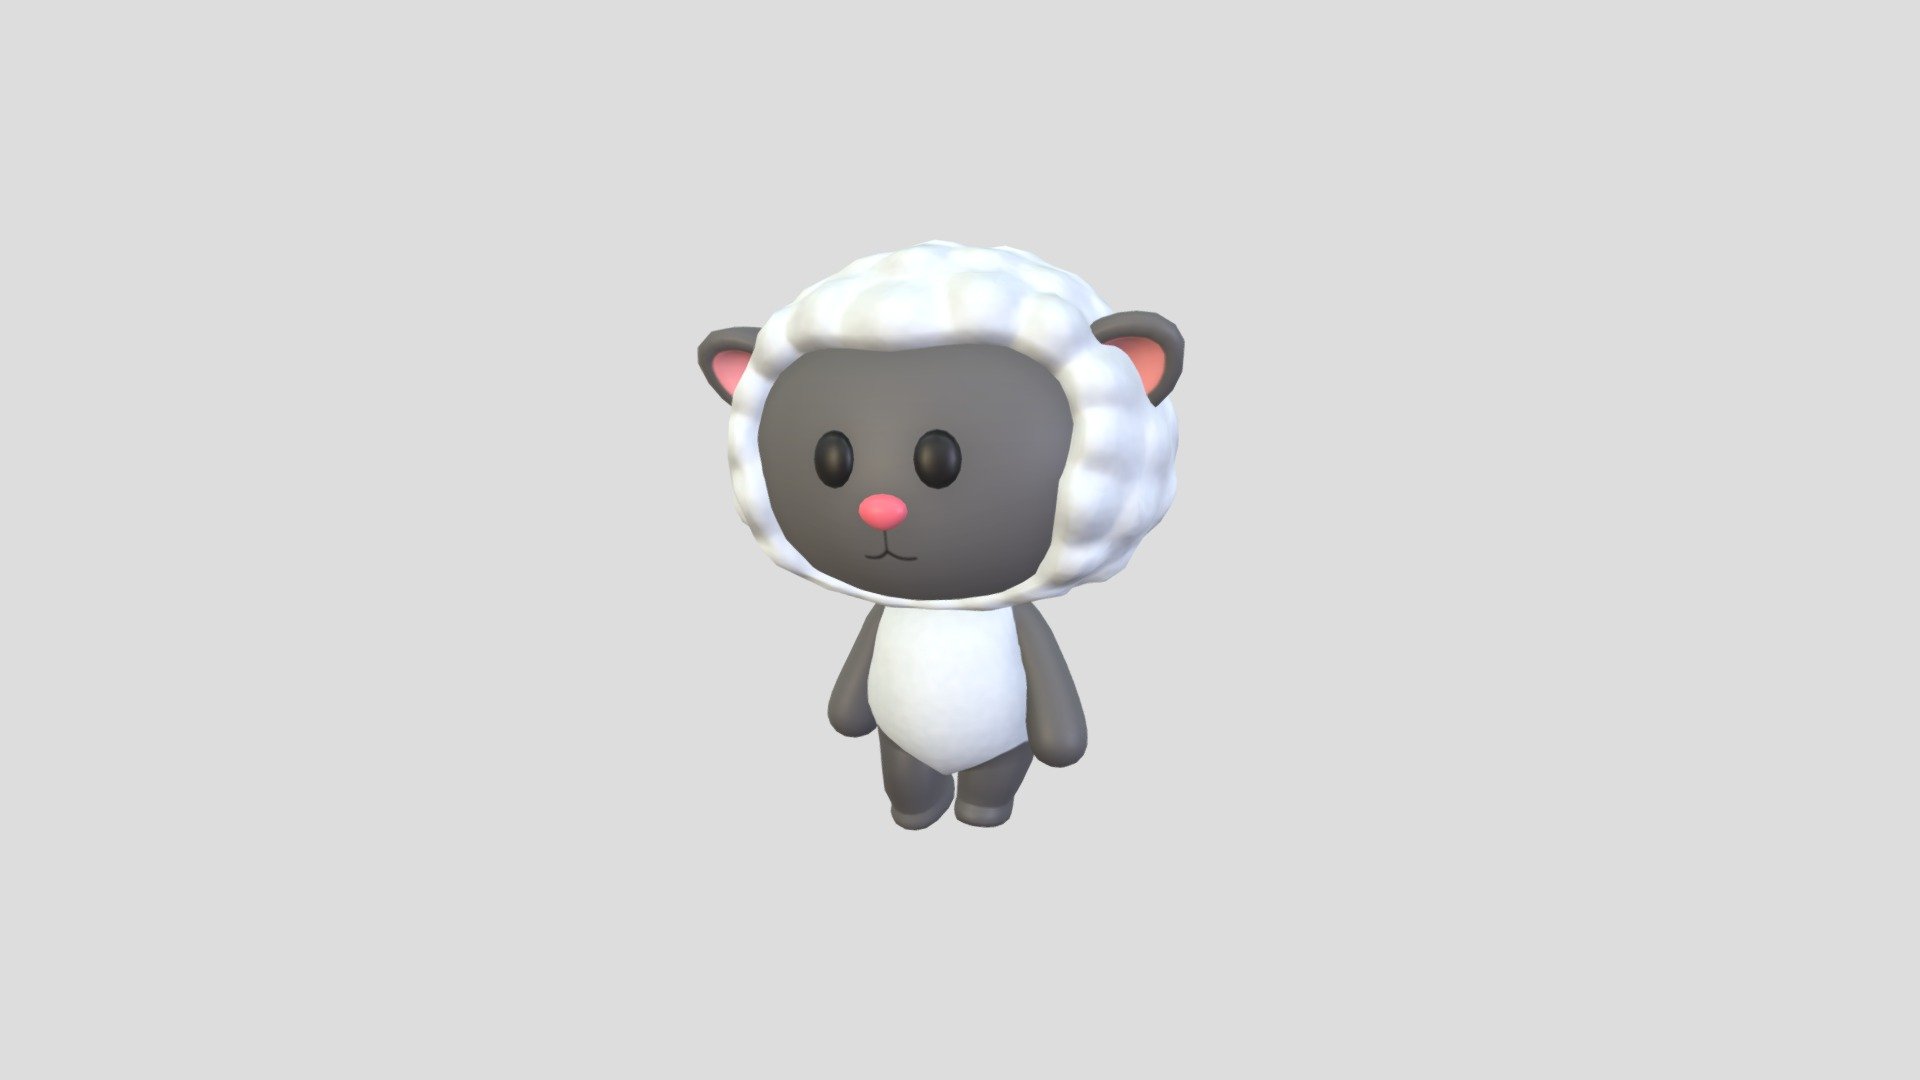 Rigged Sheep Character 3d model.      
    


File Format      
 
- 3ds max 2022  
 
- FBX  
 
- OBJ  
    


Clean topology    

Rig with CAT in 3ds Max                          

Bone and Weight skin are in fbx file       

No Facial Rig    

No Animation    

Non-overlapping unwrapped UVs        
 


PNG texture               

2048x2048                


- Base Color                        

- Normal                            

- Roughness                         



2,908 polygons                          

2,927 vertexs                          
 - Character144 Rigged Sheep - Buy Royalty Free 3D model by BaluCG 3d model